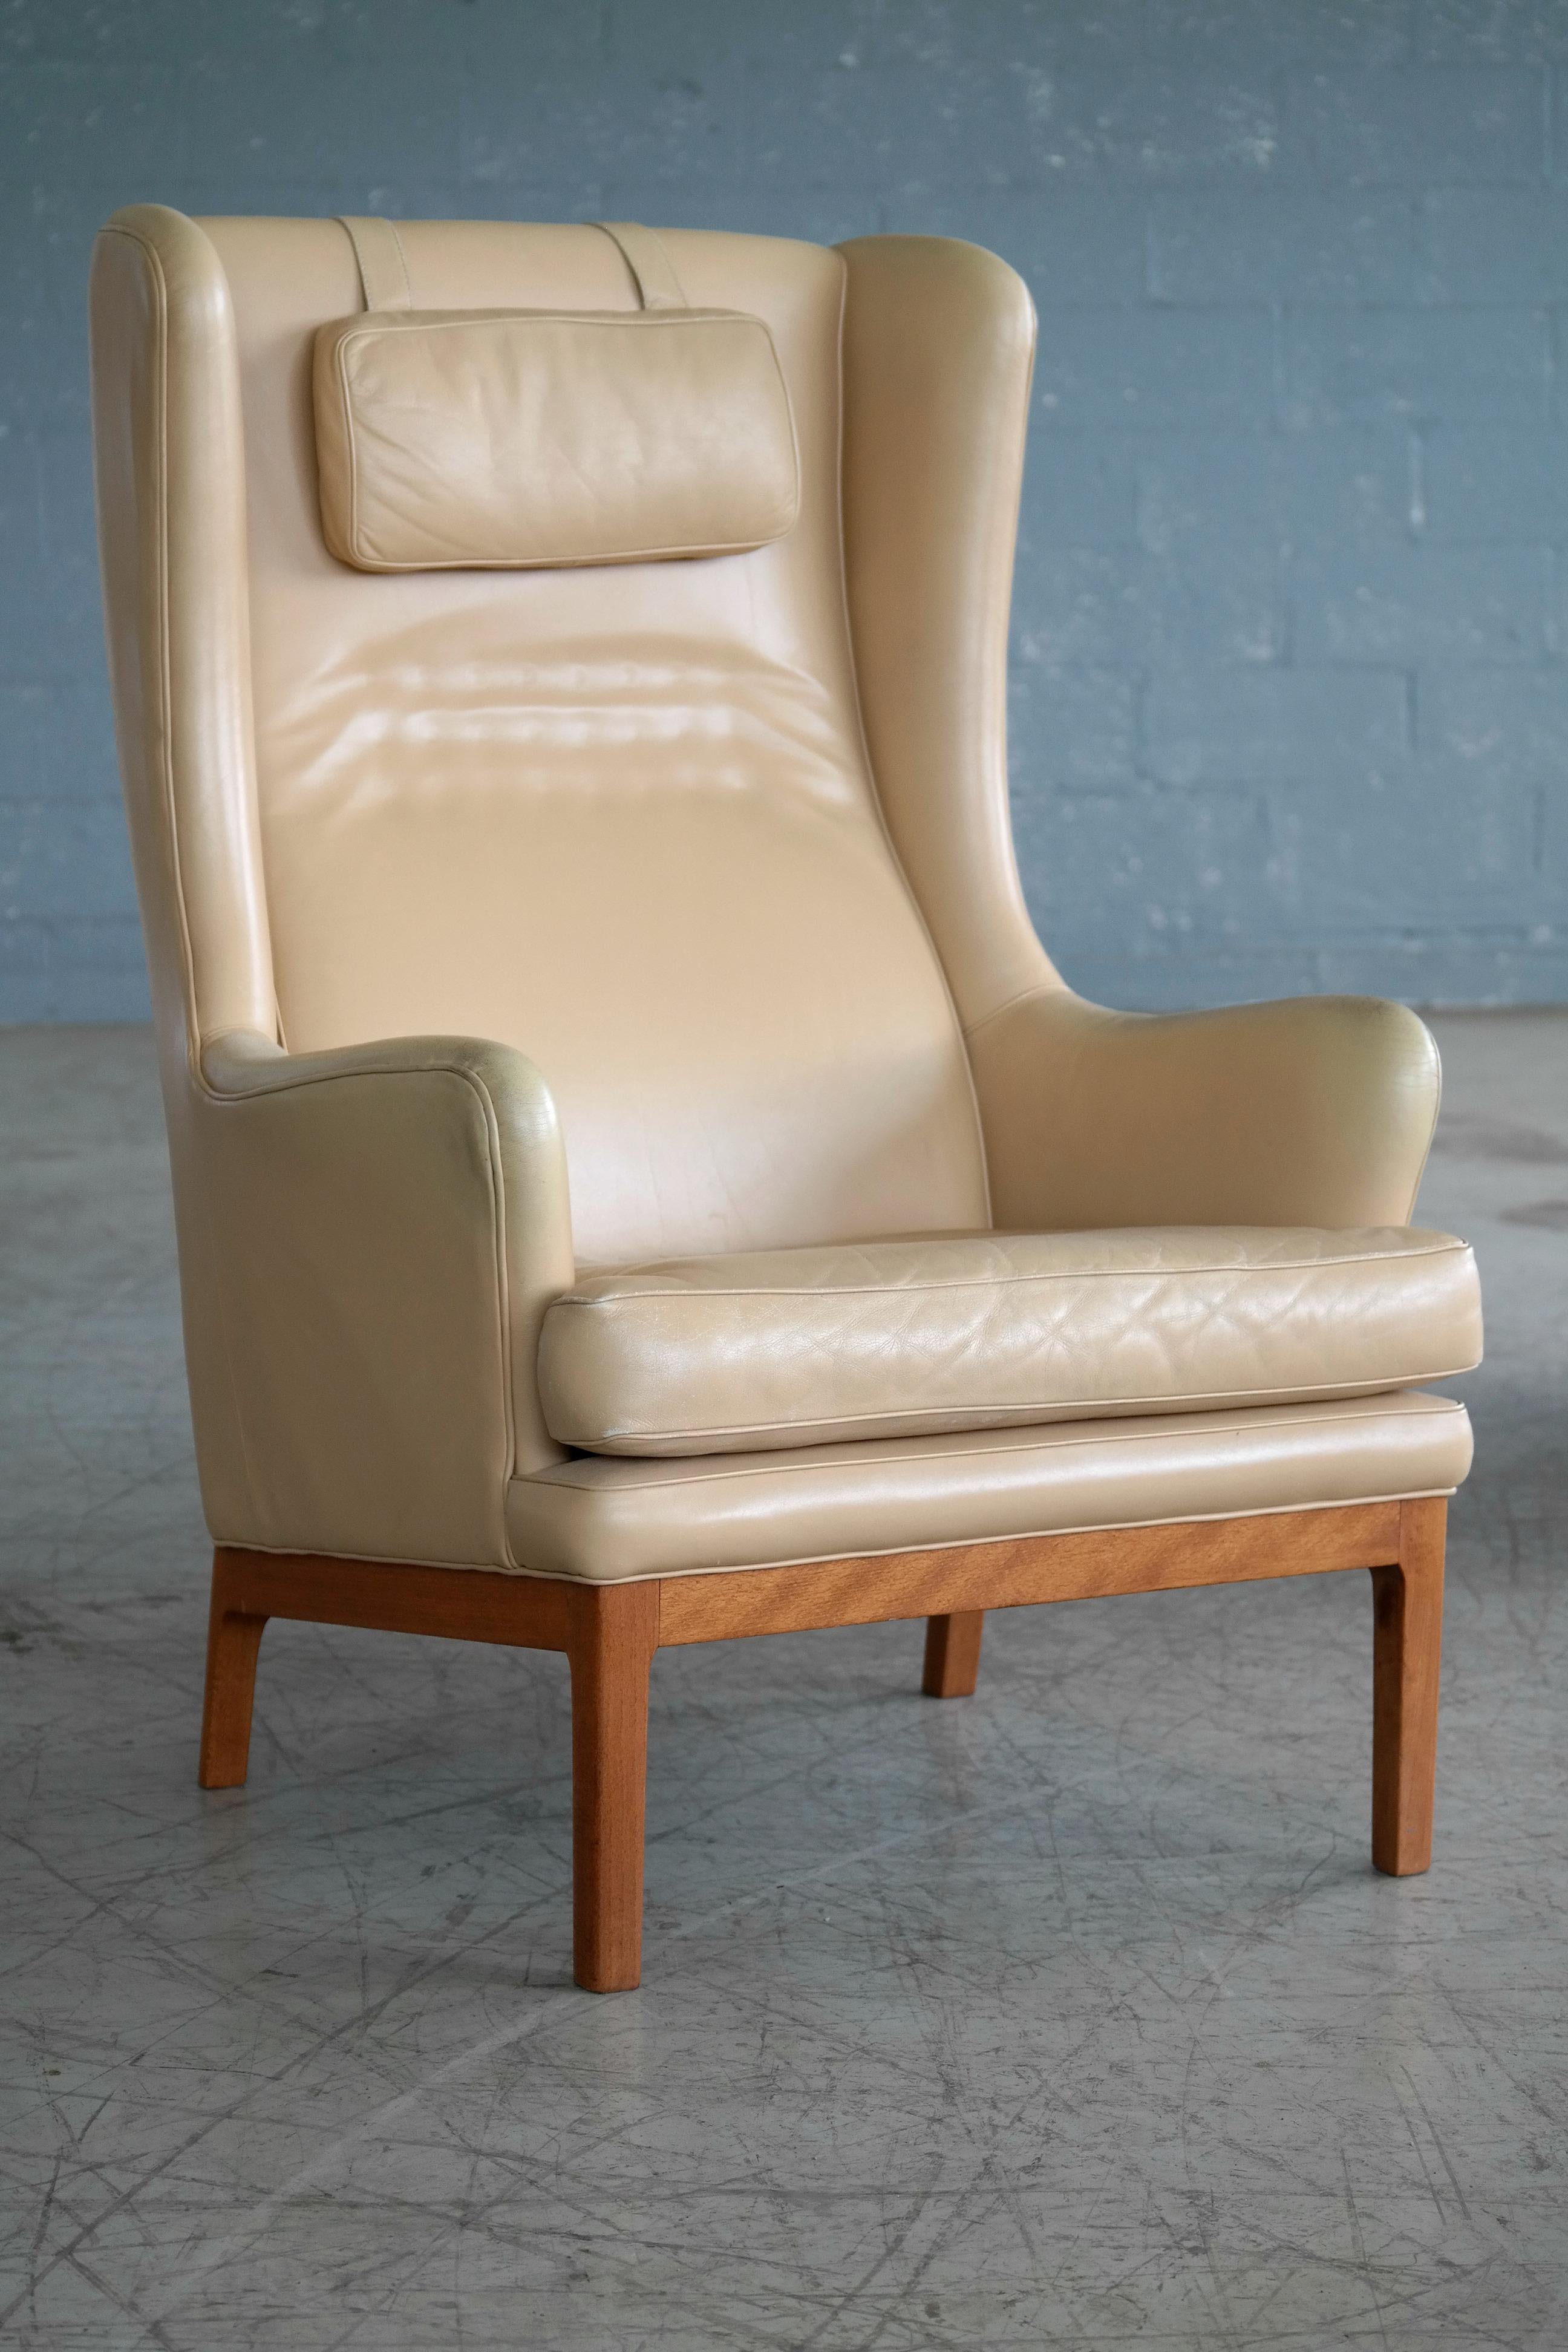 Swedish Arne Norell Pair of High Back Lounge Chairs Model Krister in Tan Leather, 1960s